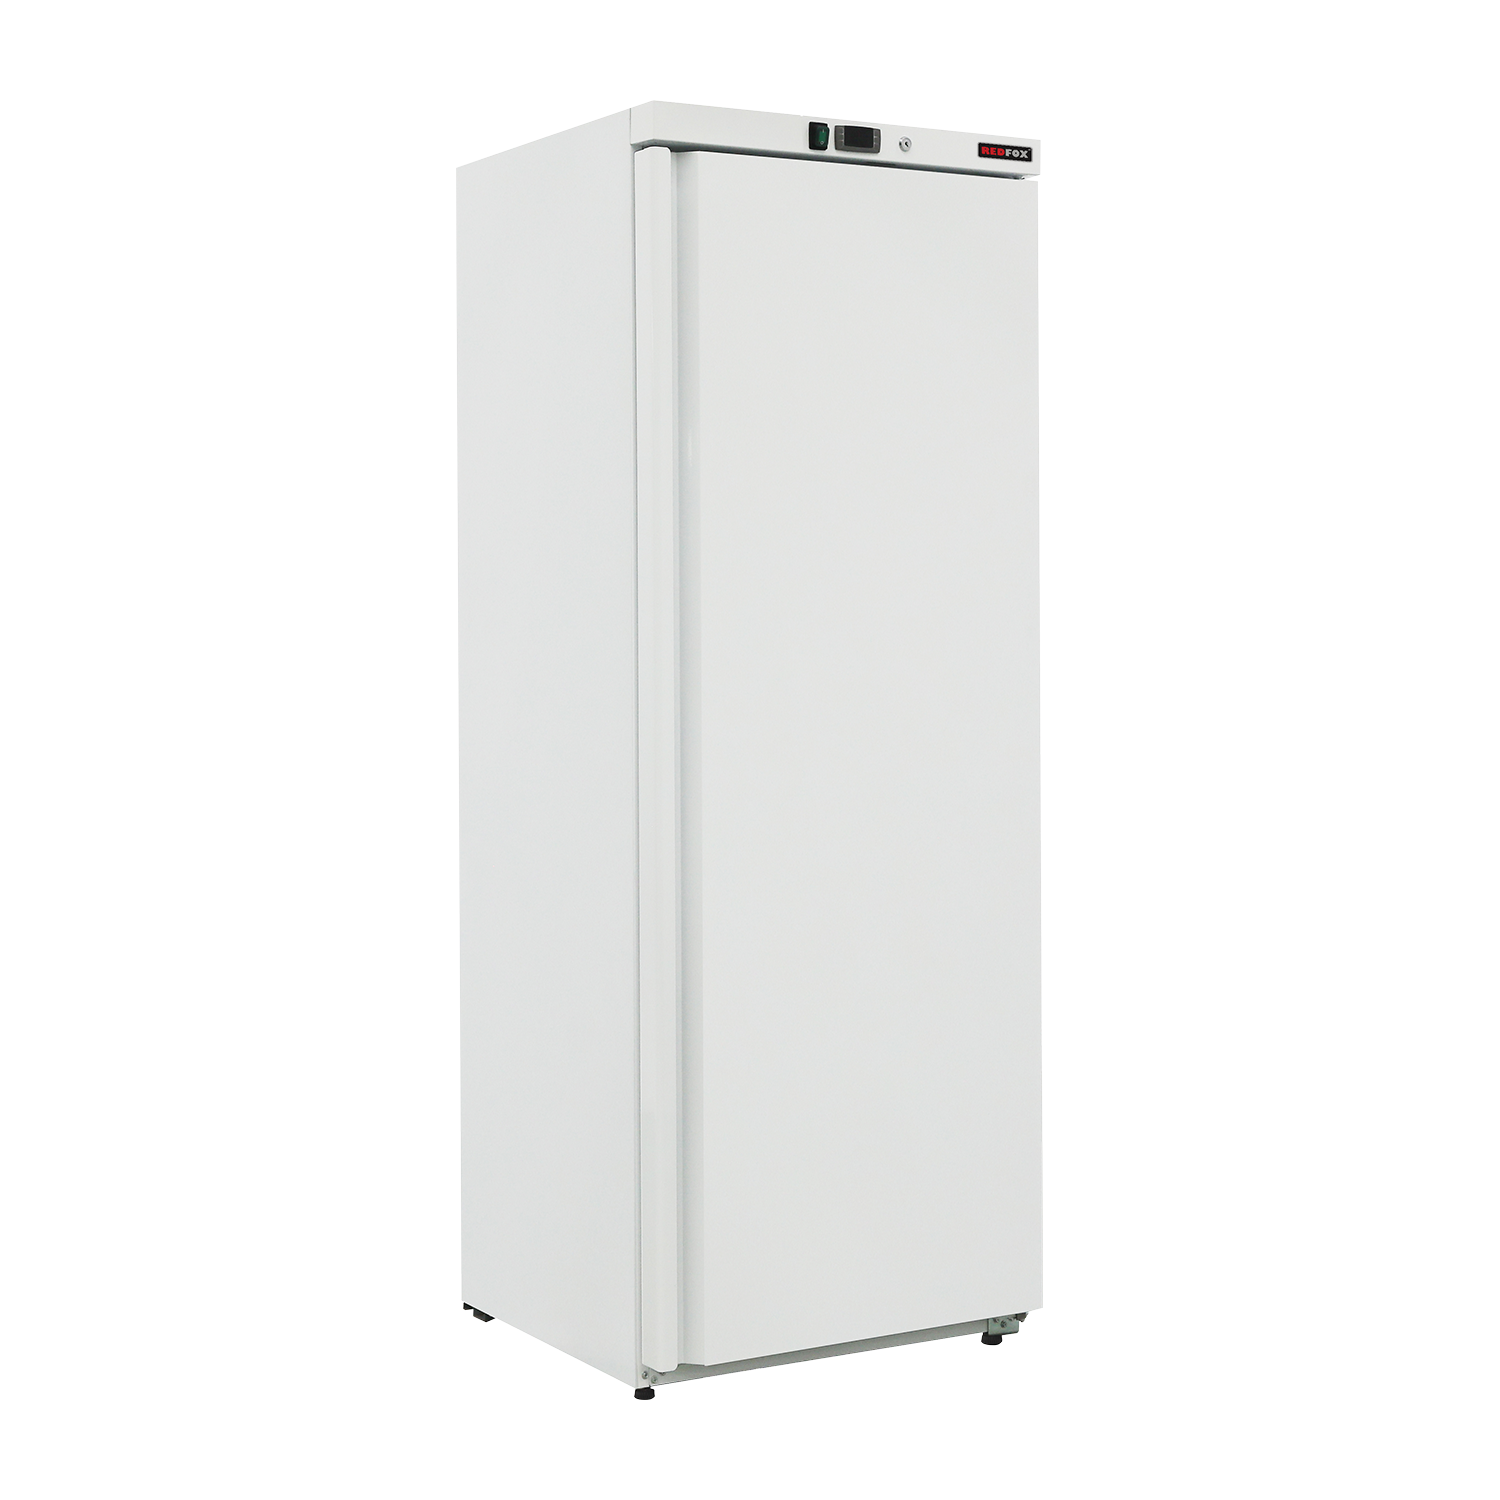 Cooling cabinet 570 l, white | REDFOX - DRR 600